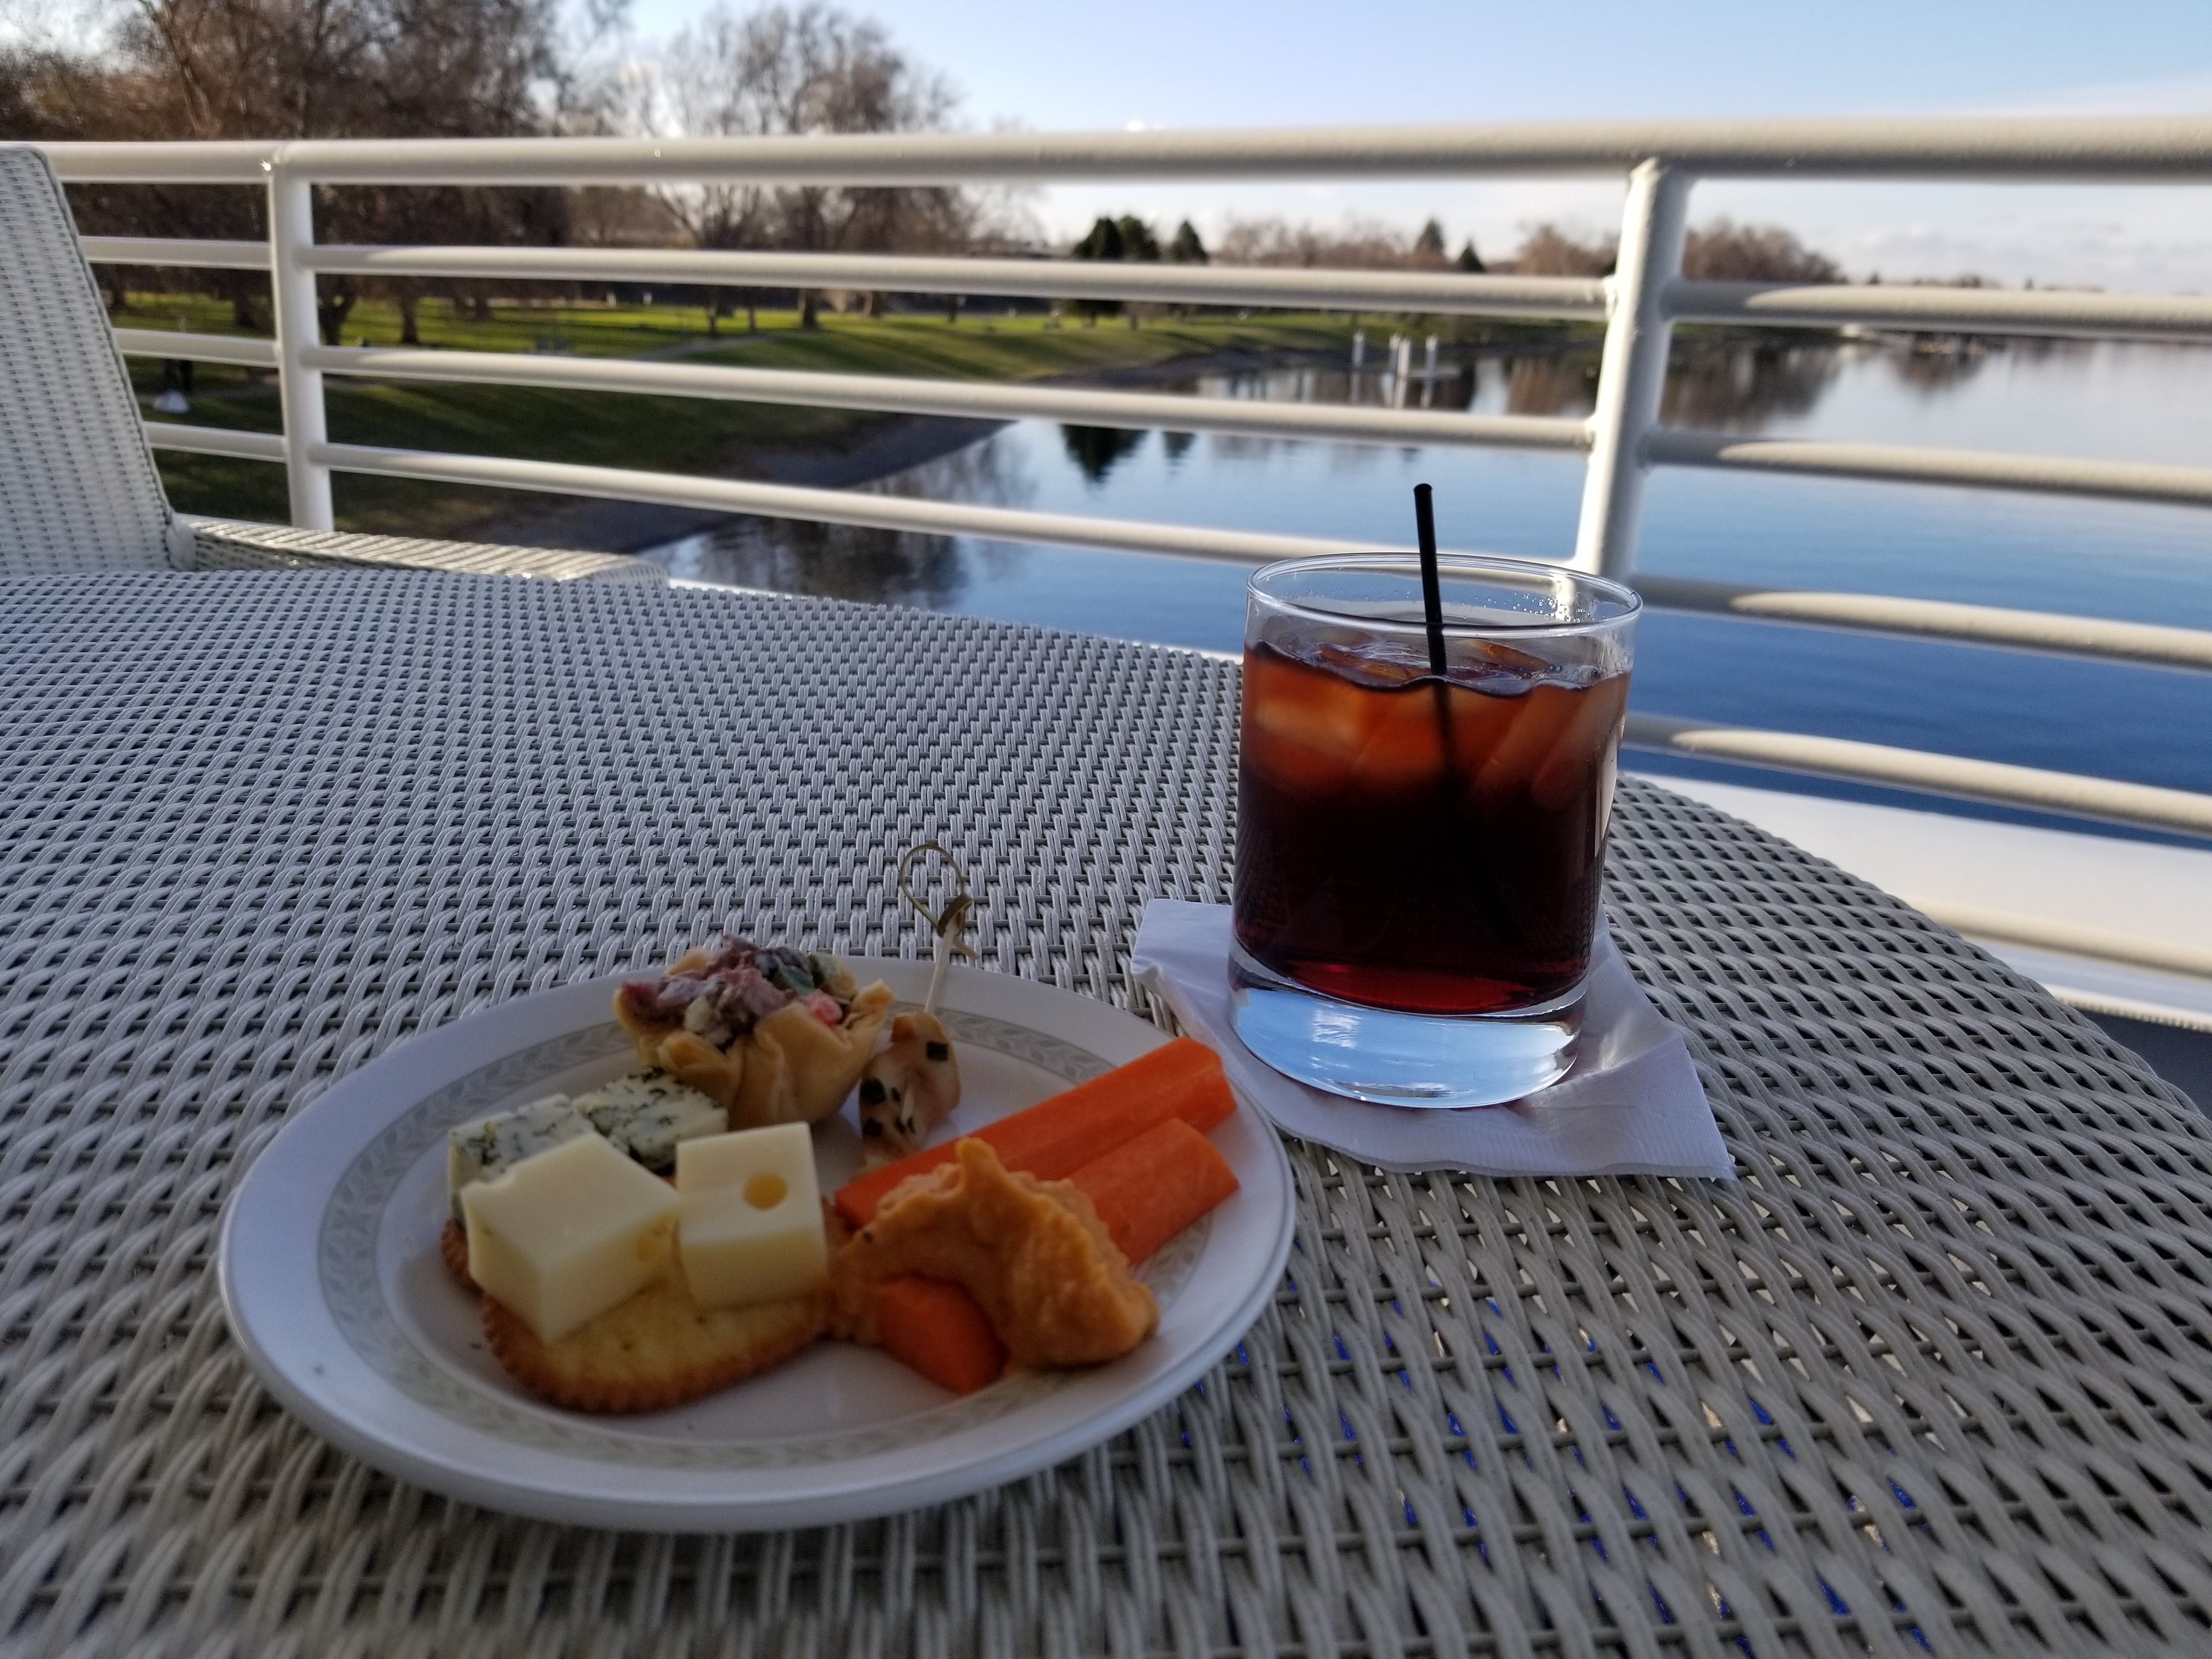 Cruising the Columbia River aboard the American Song with an afternoon cocktail and snack watching the world drift slowly by.